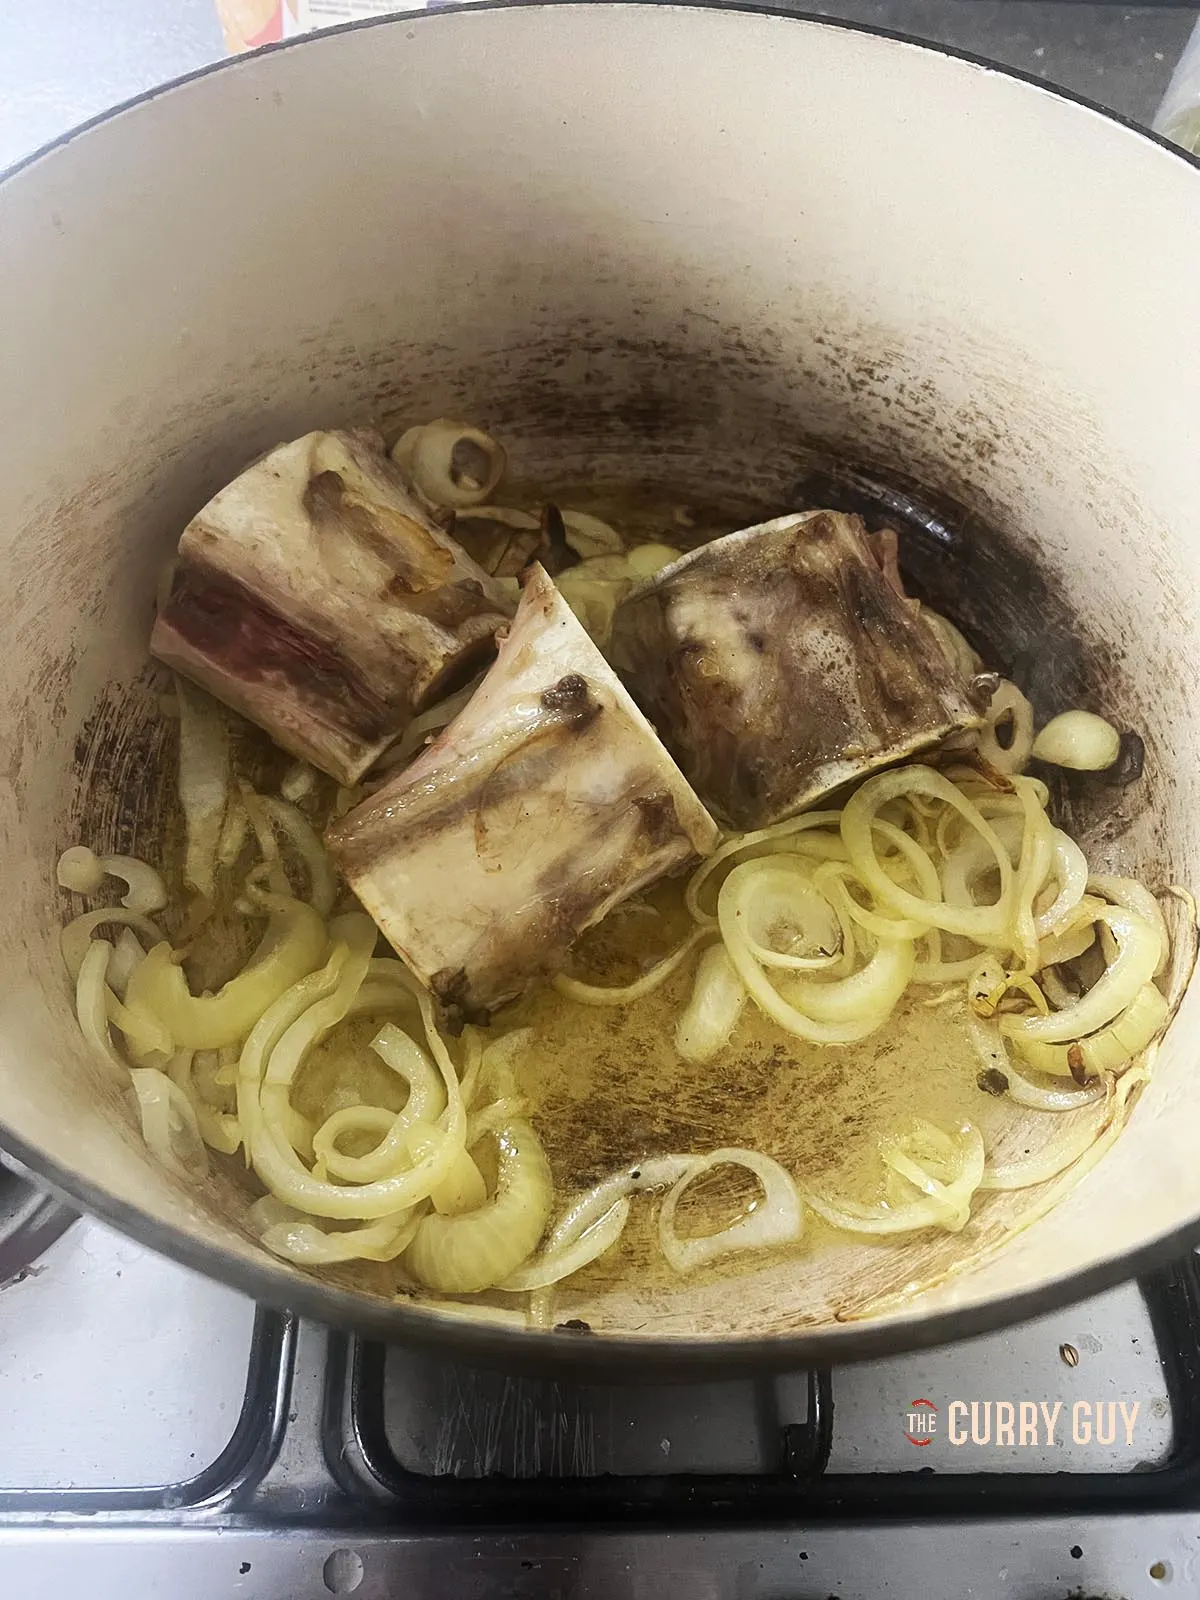 Frying the sliced onions, marrow bones and garlic in the pot.